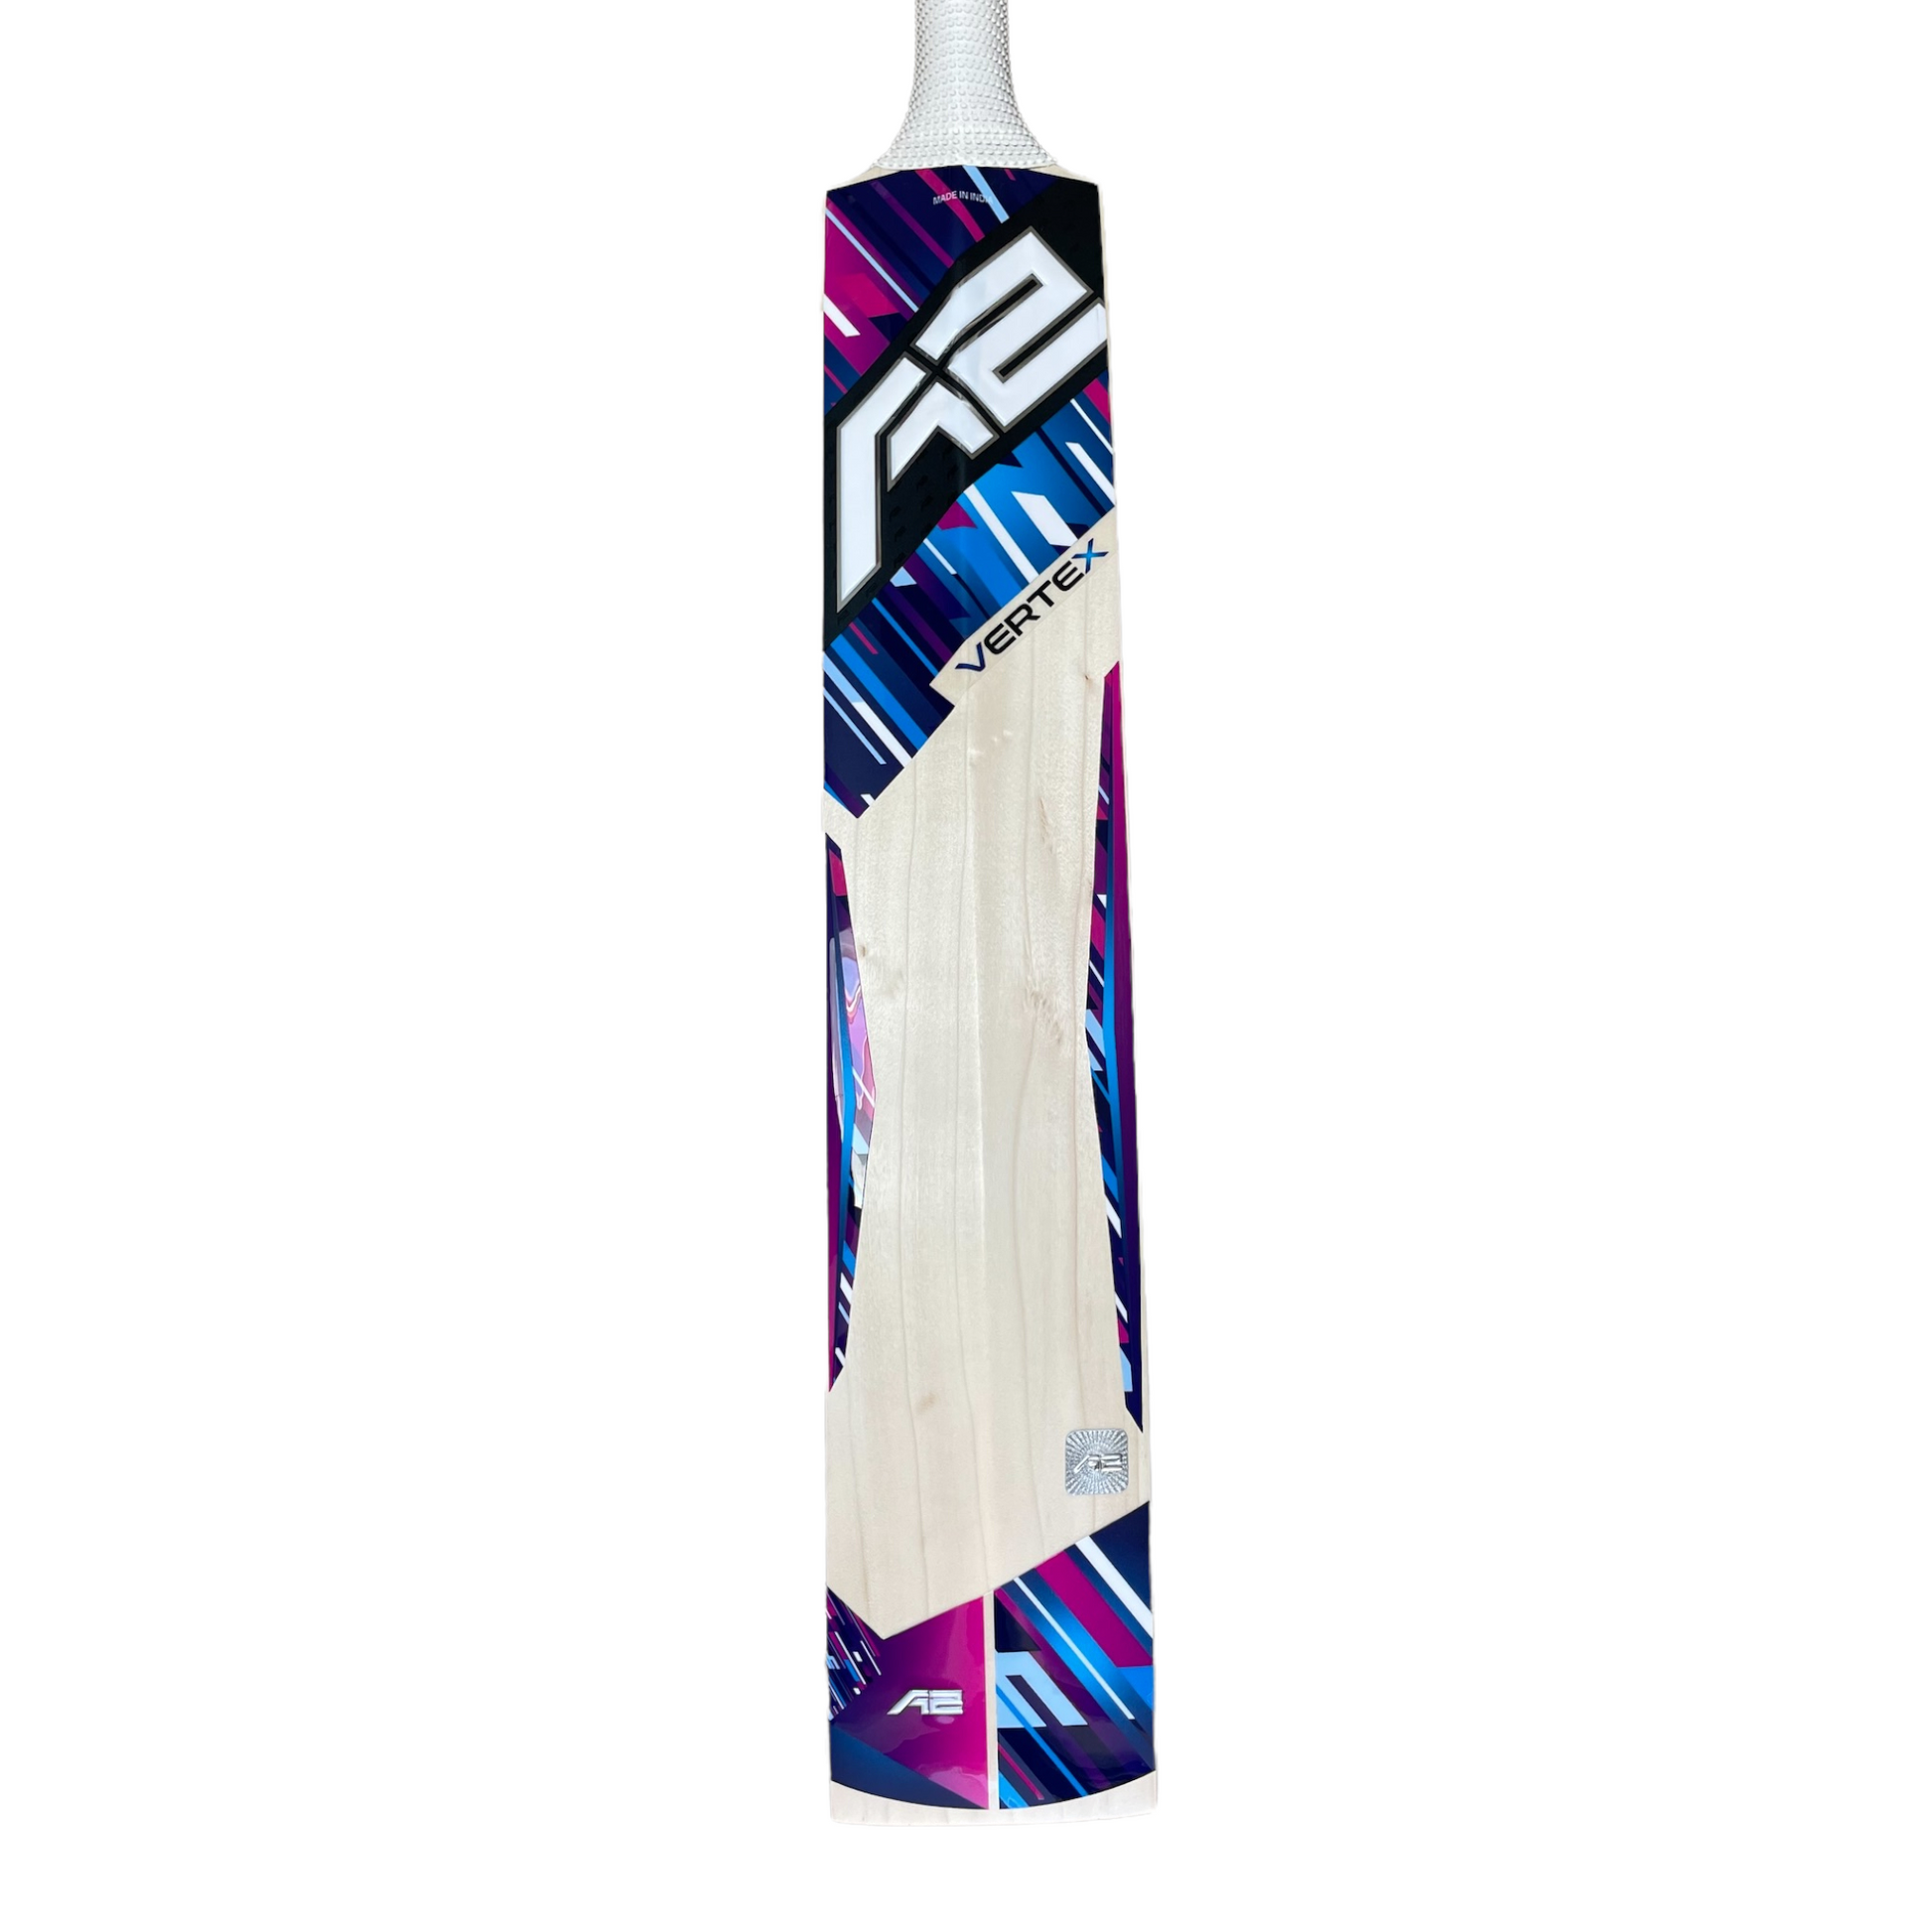 A2 Vertex 2022 English willow cricket bat quality cricket bat low price UK Custom cricket 201 online shop store cricket bat supplier Brighton and Hove East Sussex